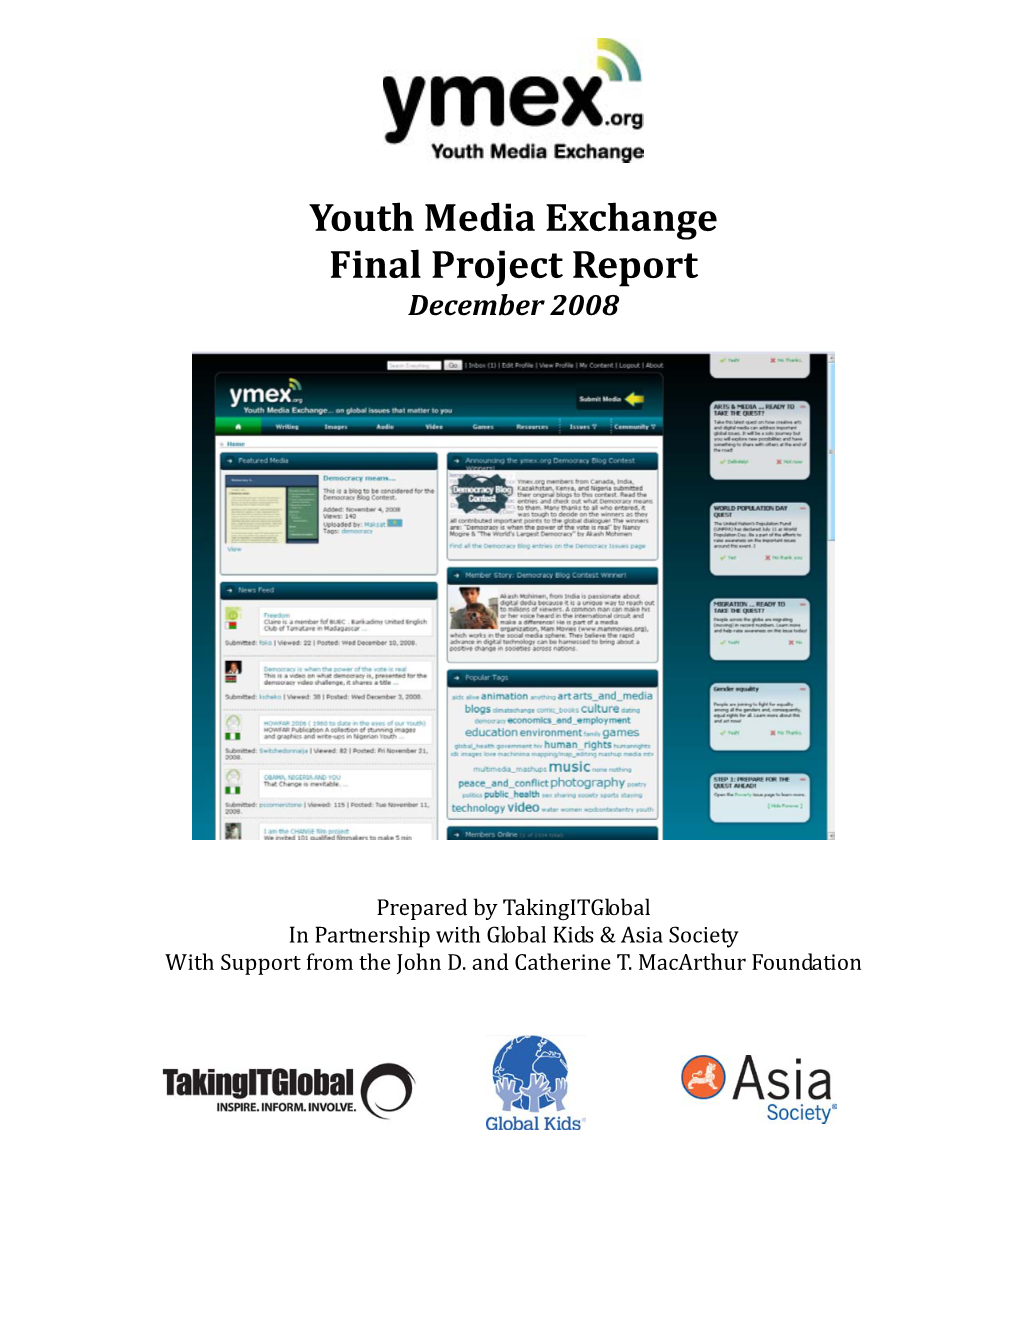 Youth Media Exchange Final Project Report December 2008